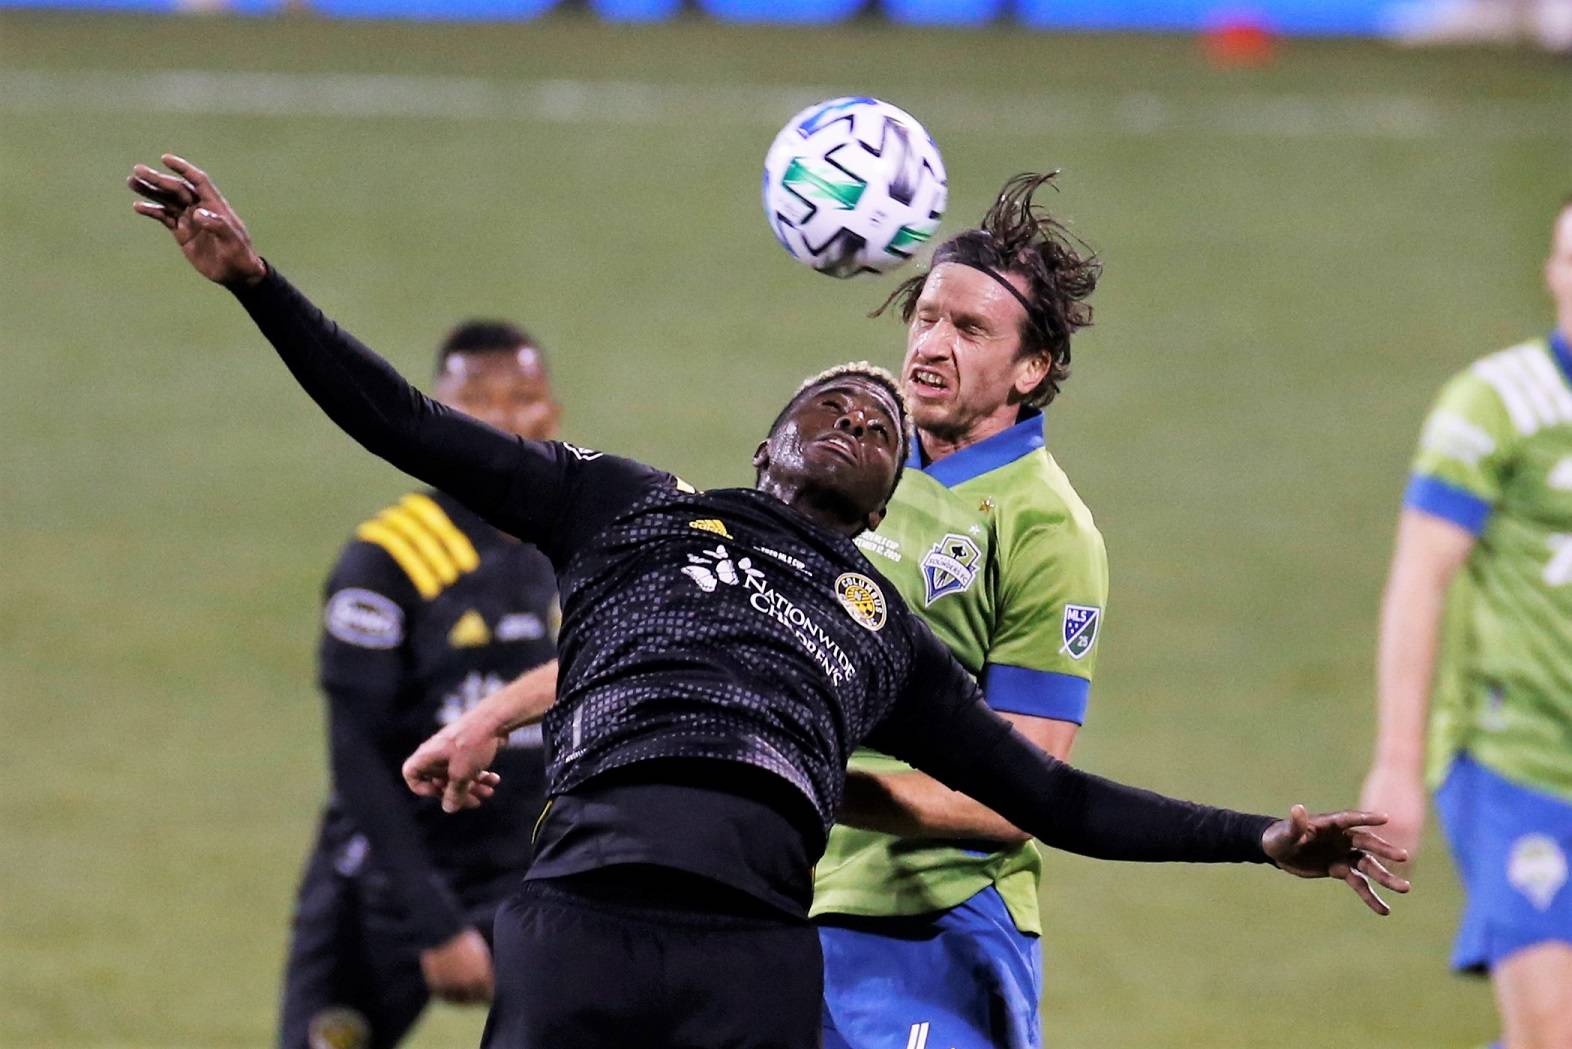 Columbus Crew’s Gyasi Zardes, front, and Seattle Sounders’ Gustav Svensson vie for a head ball during the second half of the MLS Cup championship game Saturday in Columbus, Ohio. The Crew won 3-0. (AP Photo/Jay LaPrete)